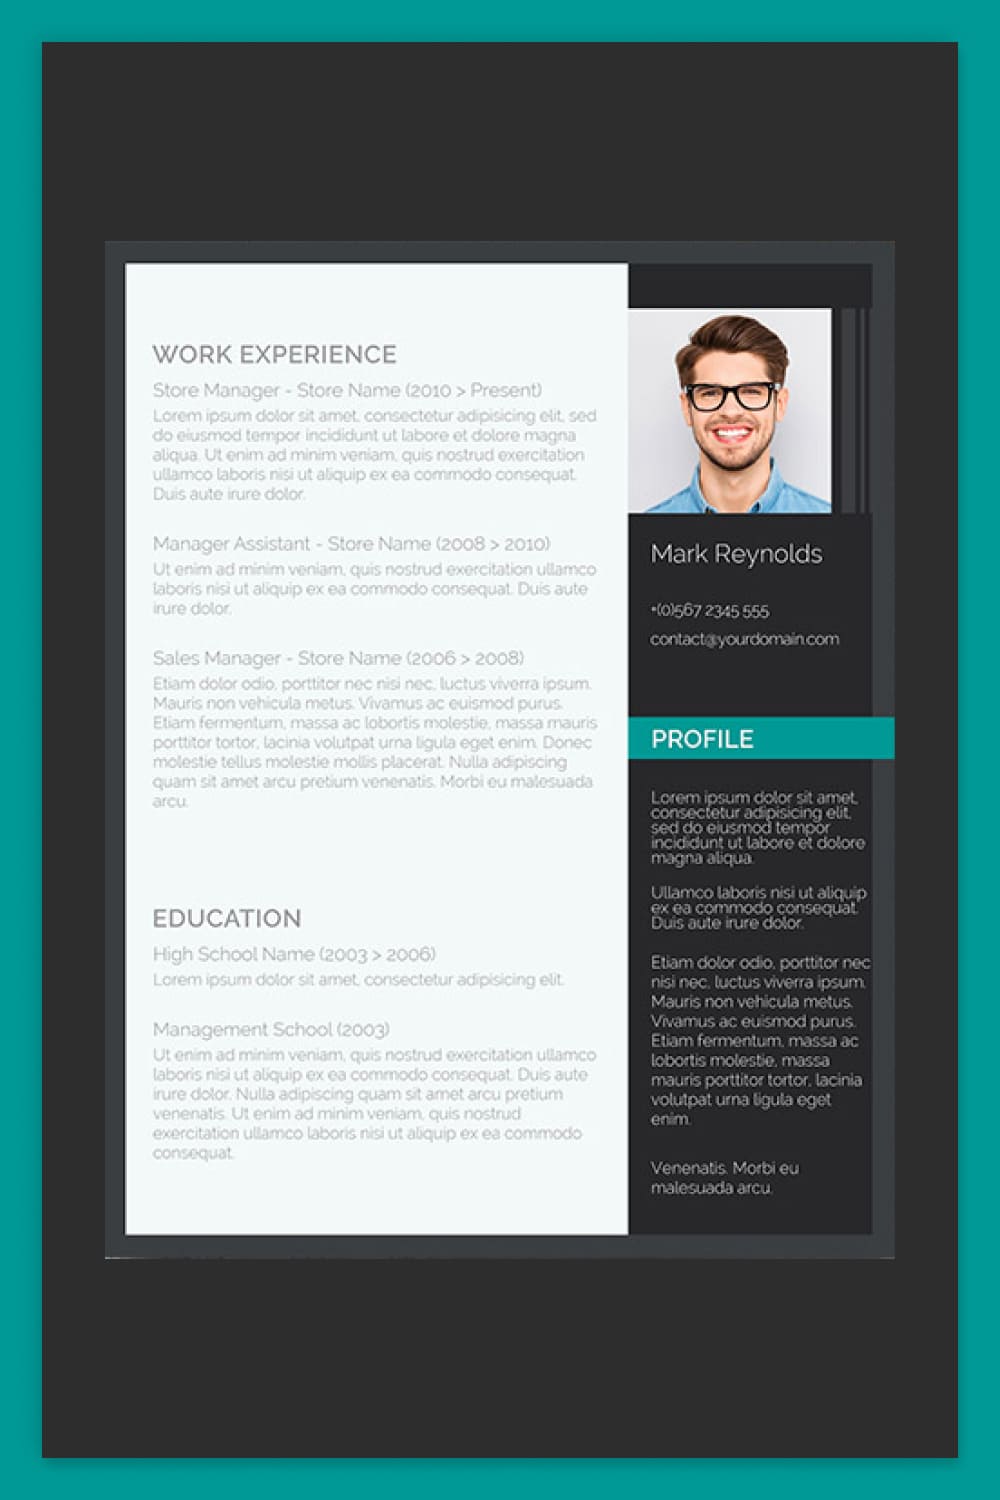 Resume with white and black column, photo and green accent.